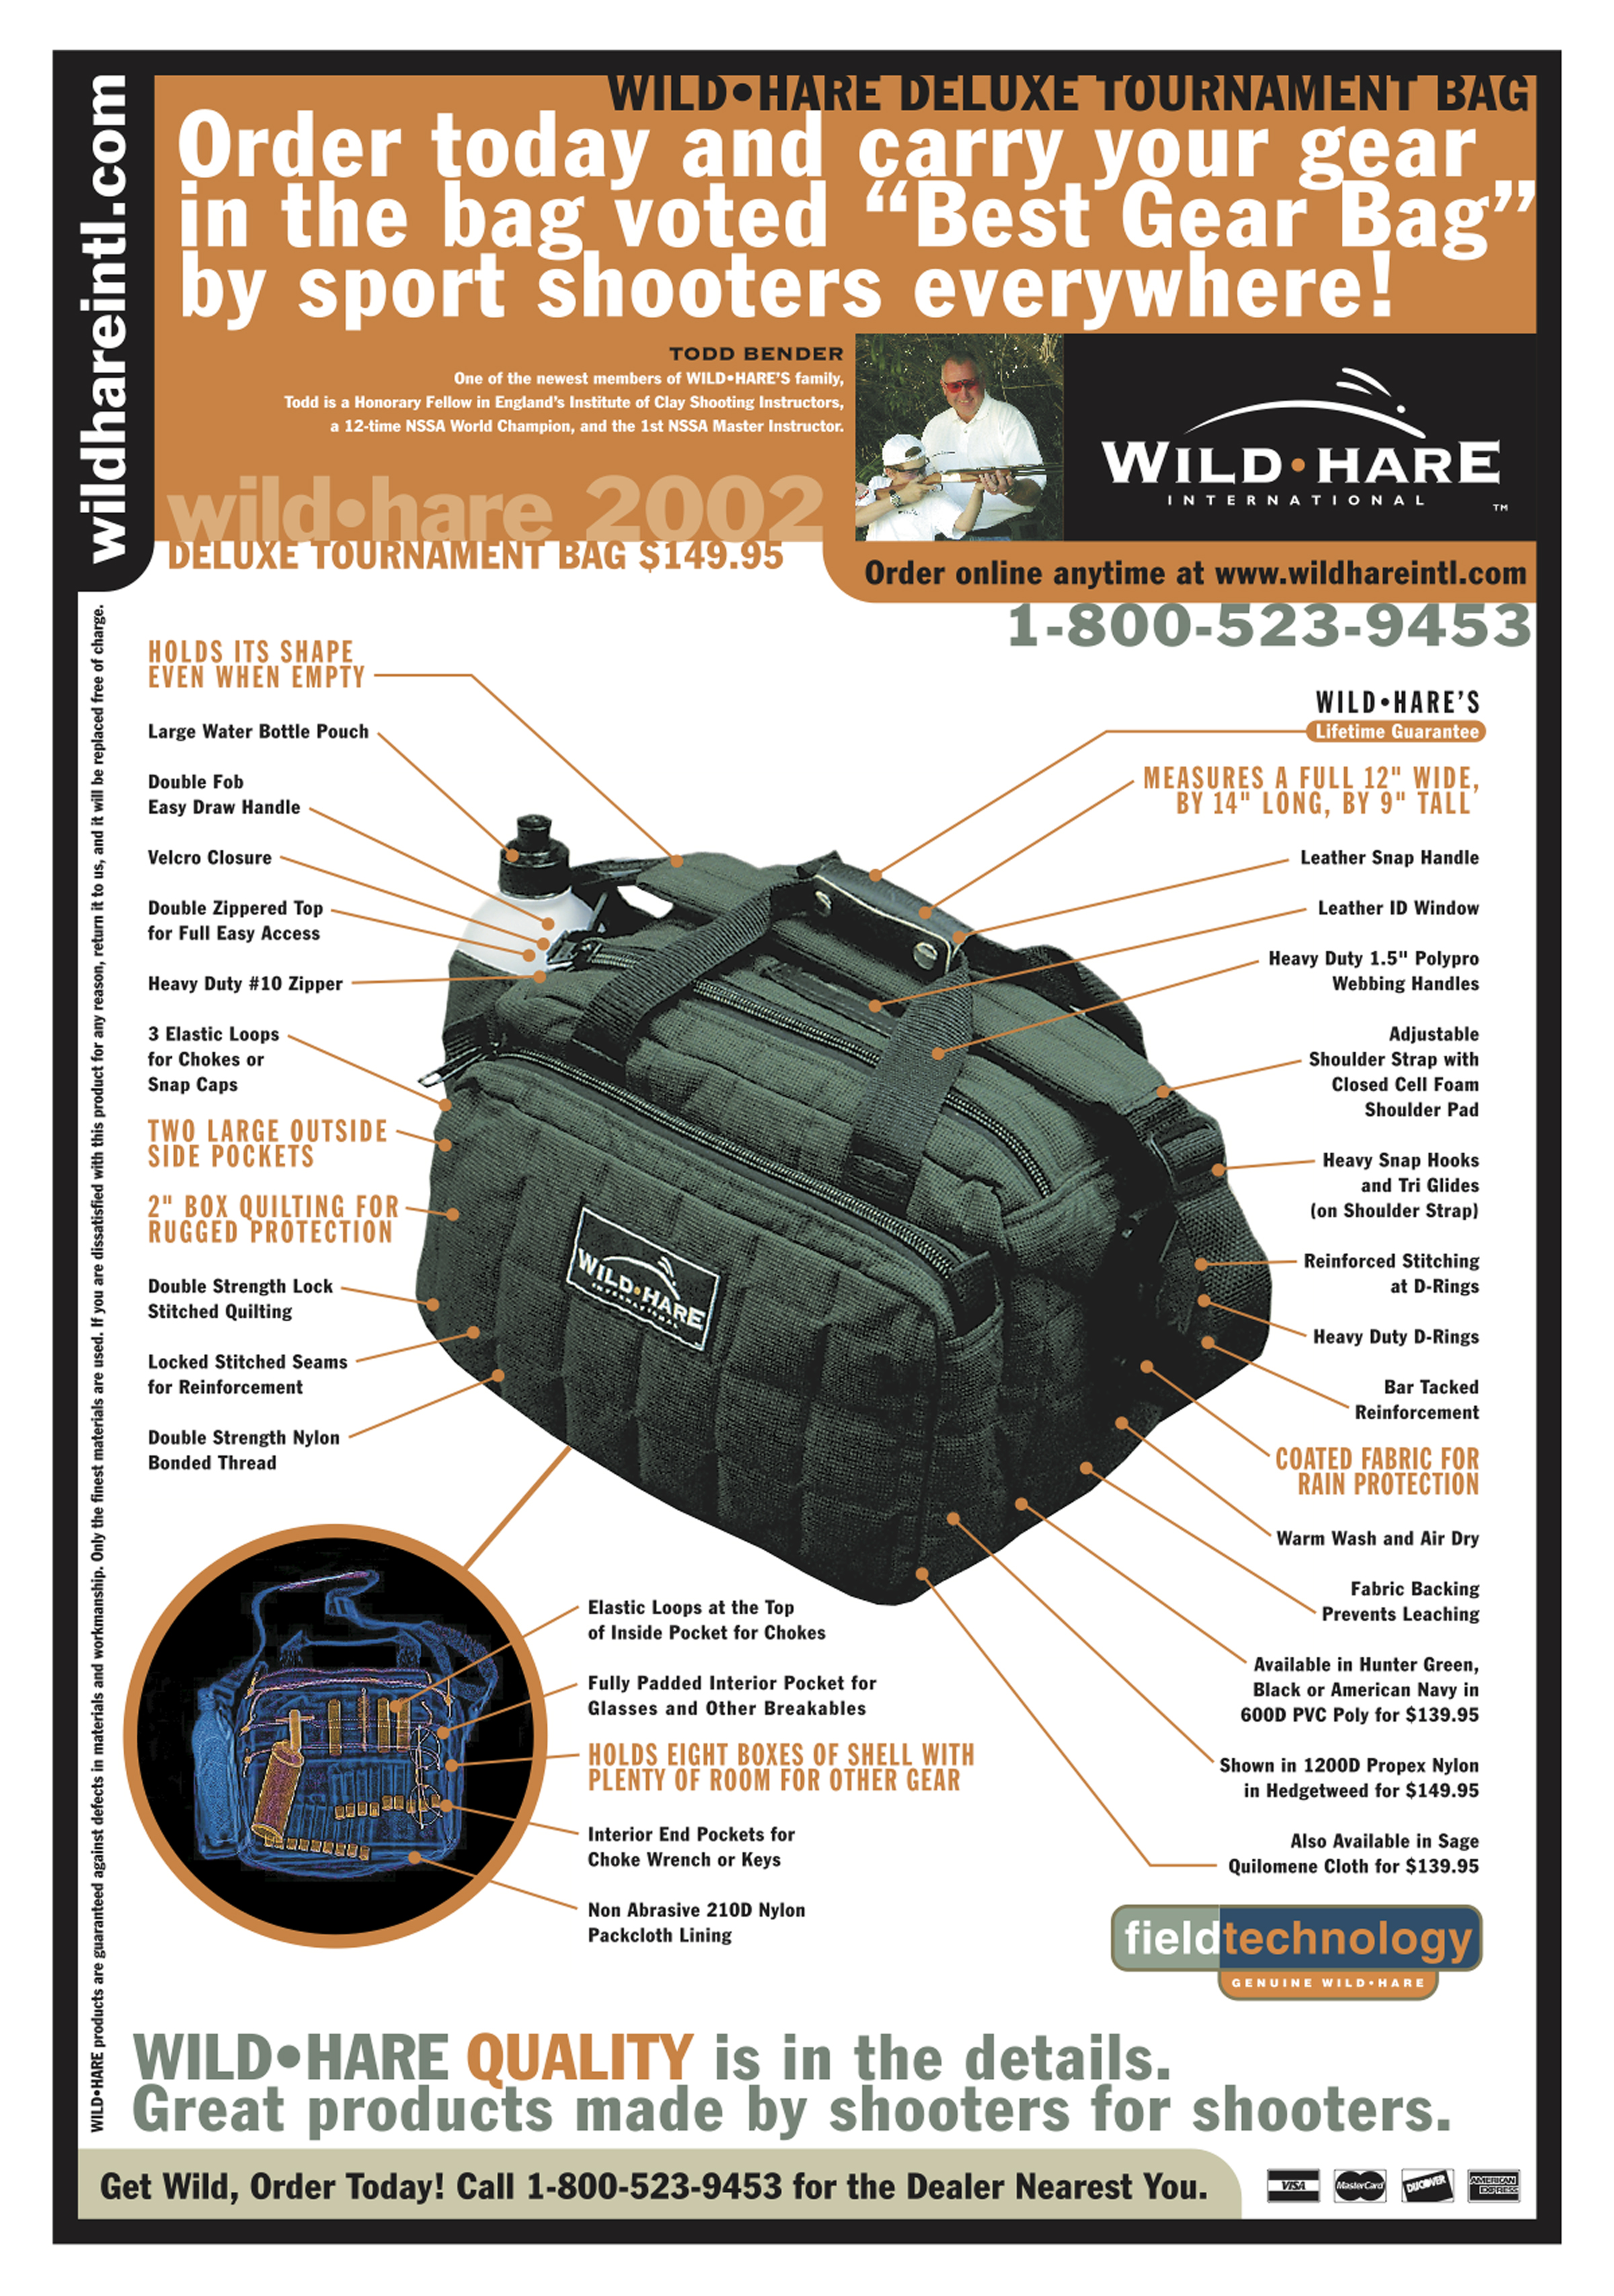  Wild•Hare International consumer ad  Design, branding and creative direction by Chuck Mitchell  Photograph by API Cine, Memphis 